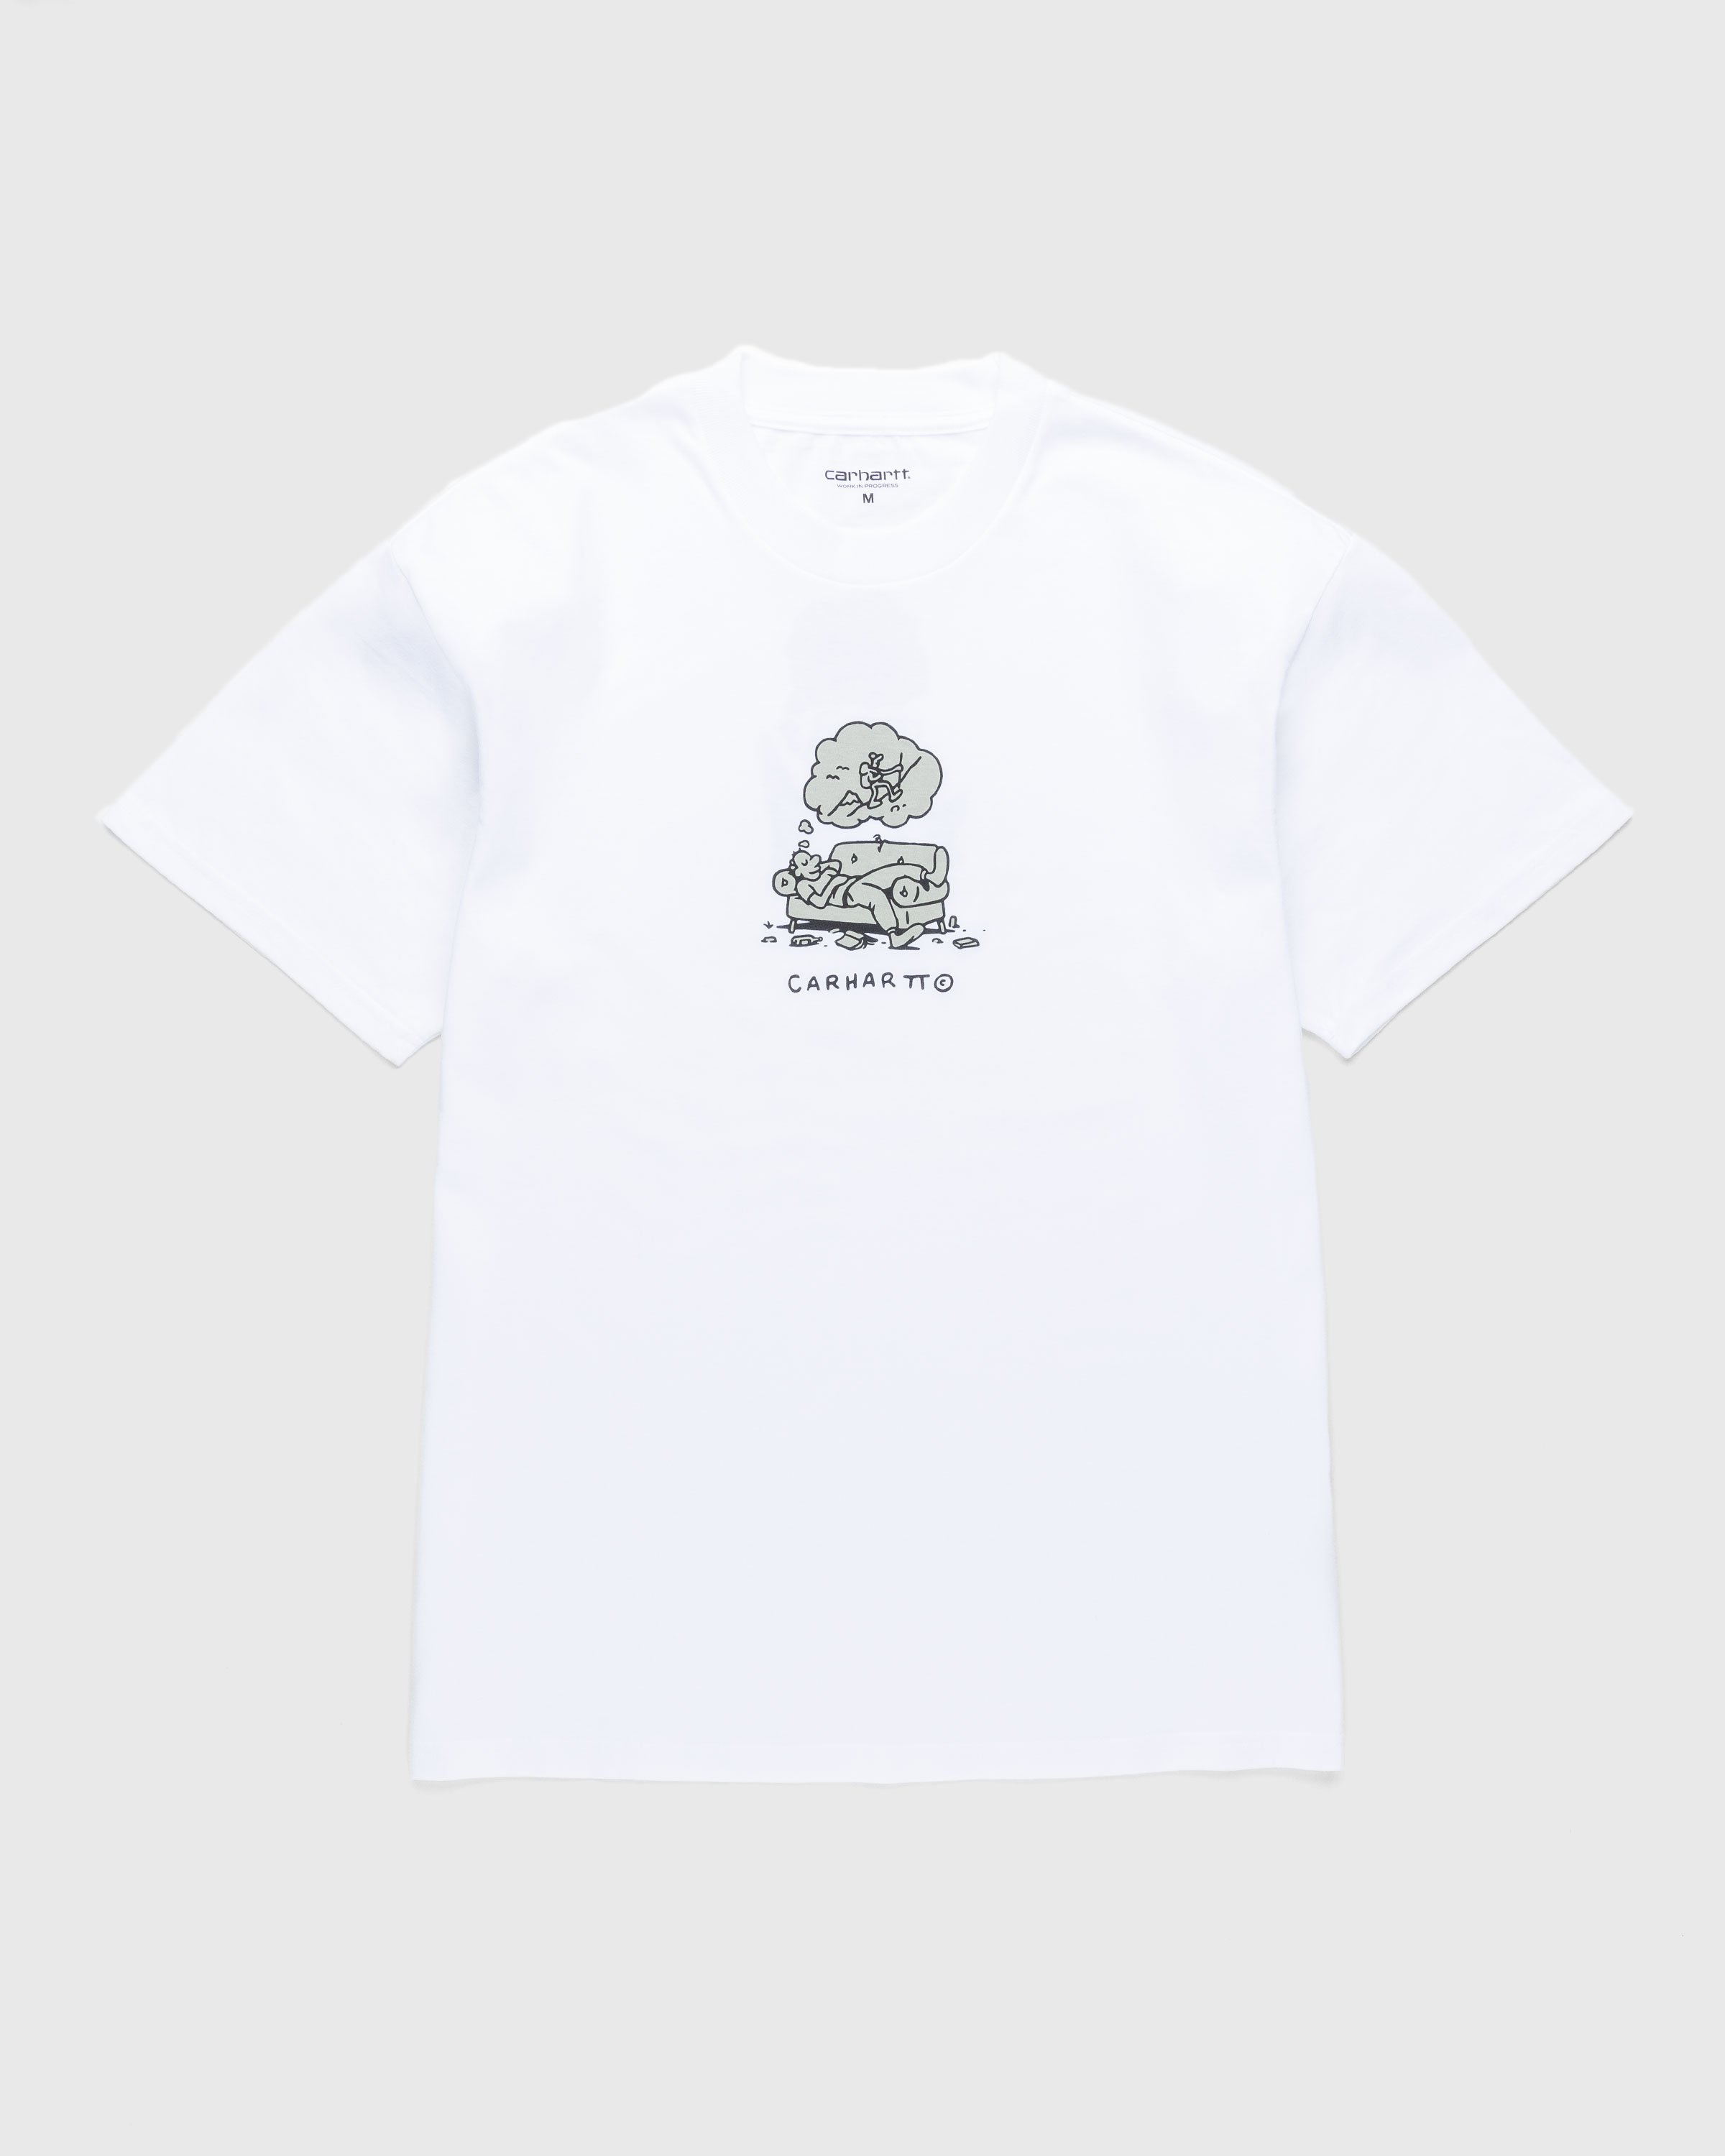 Carhartt WIP - Other Side T-Shirt White - Clothing - White - Image 1